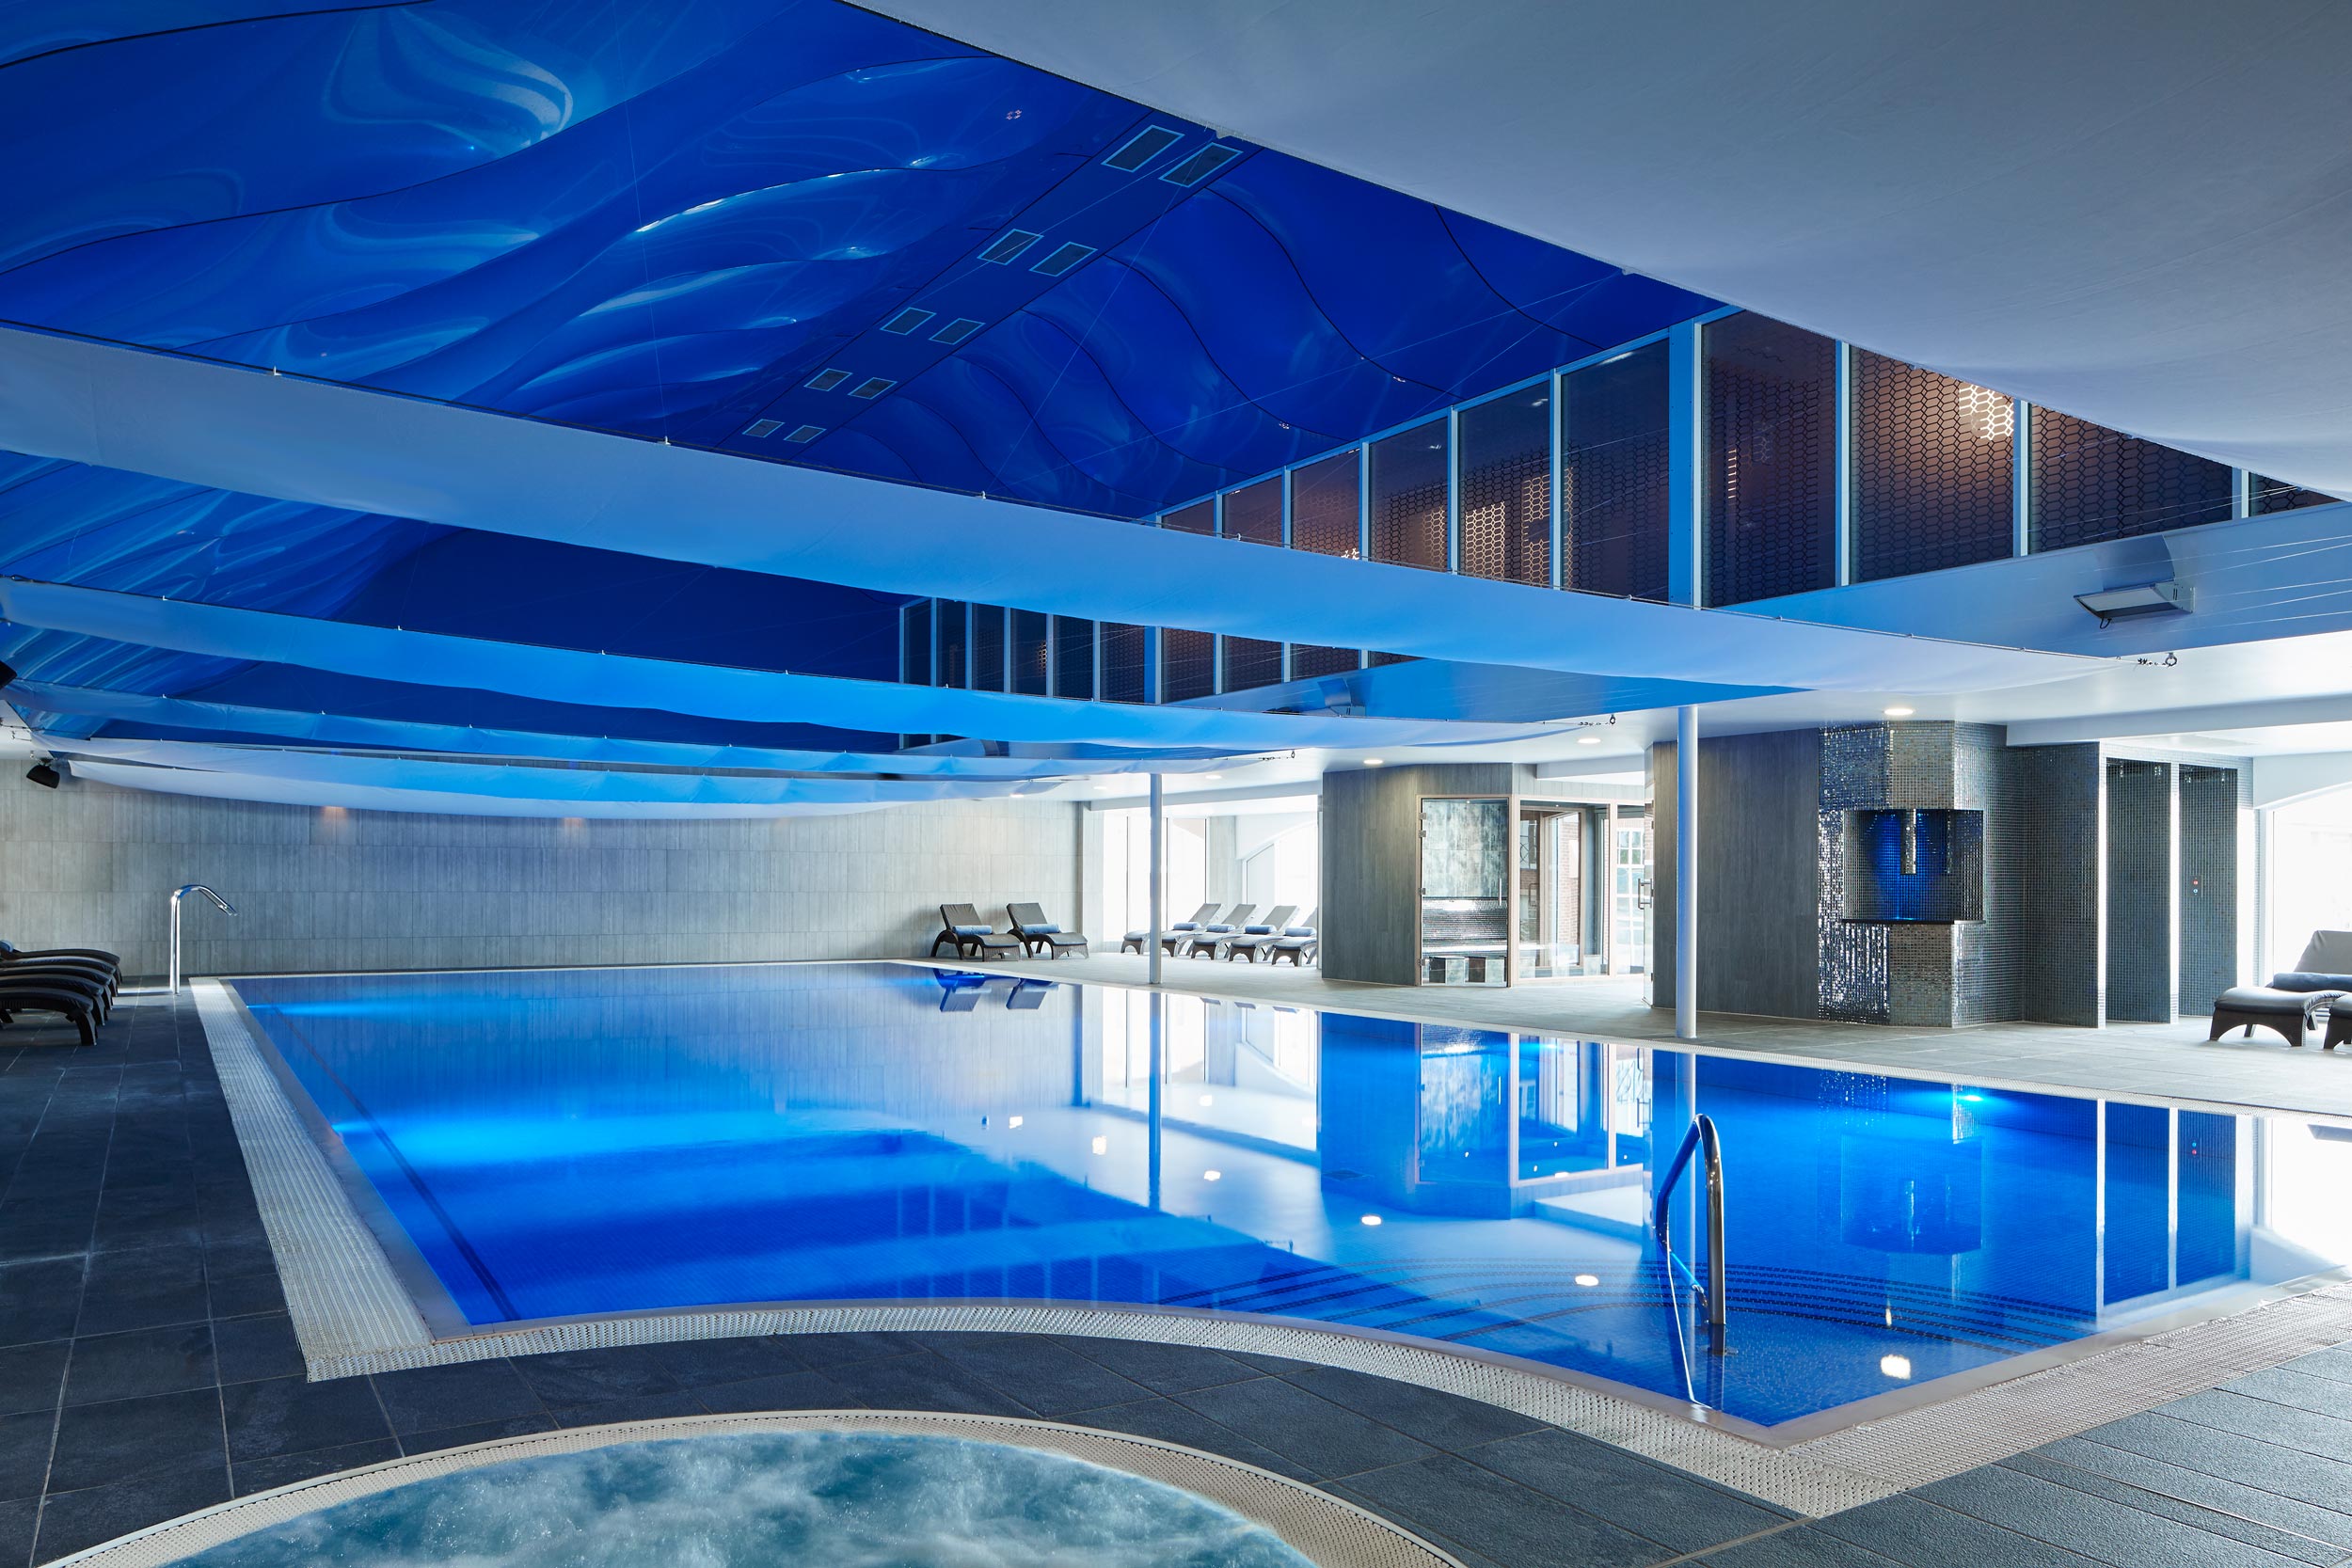 The pool at Formby Hall resort & spa.  Spa photography by Mike Caldwell